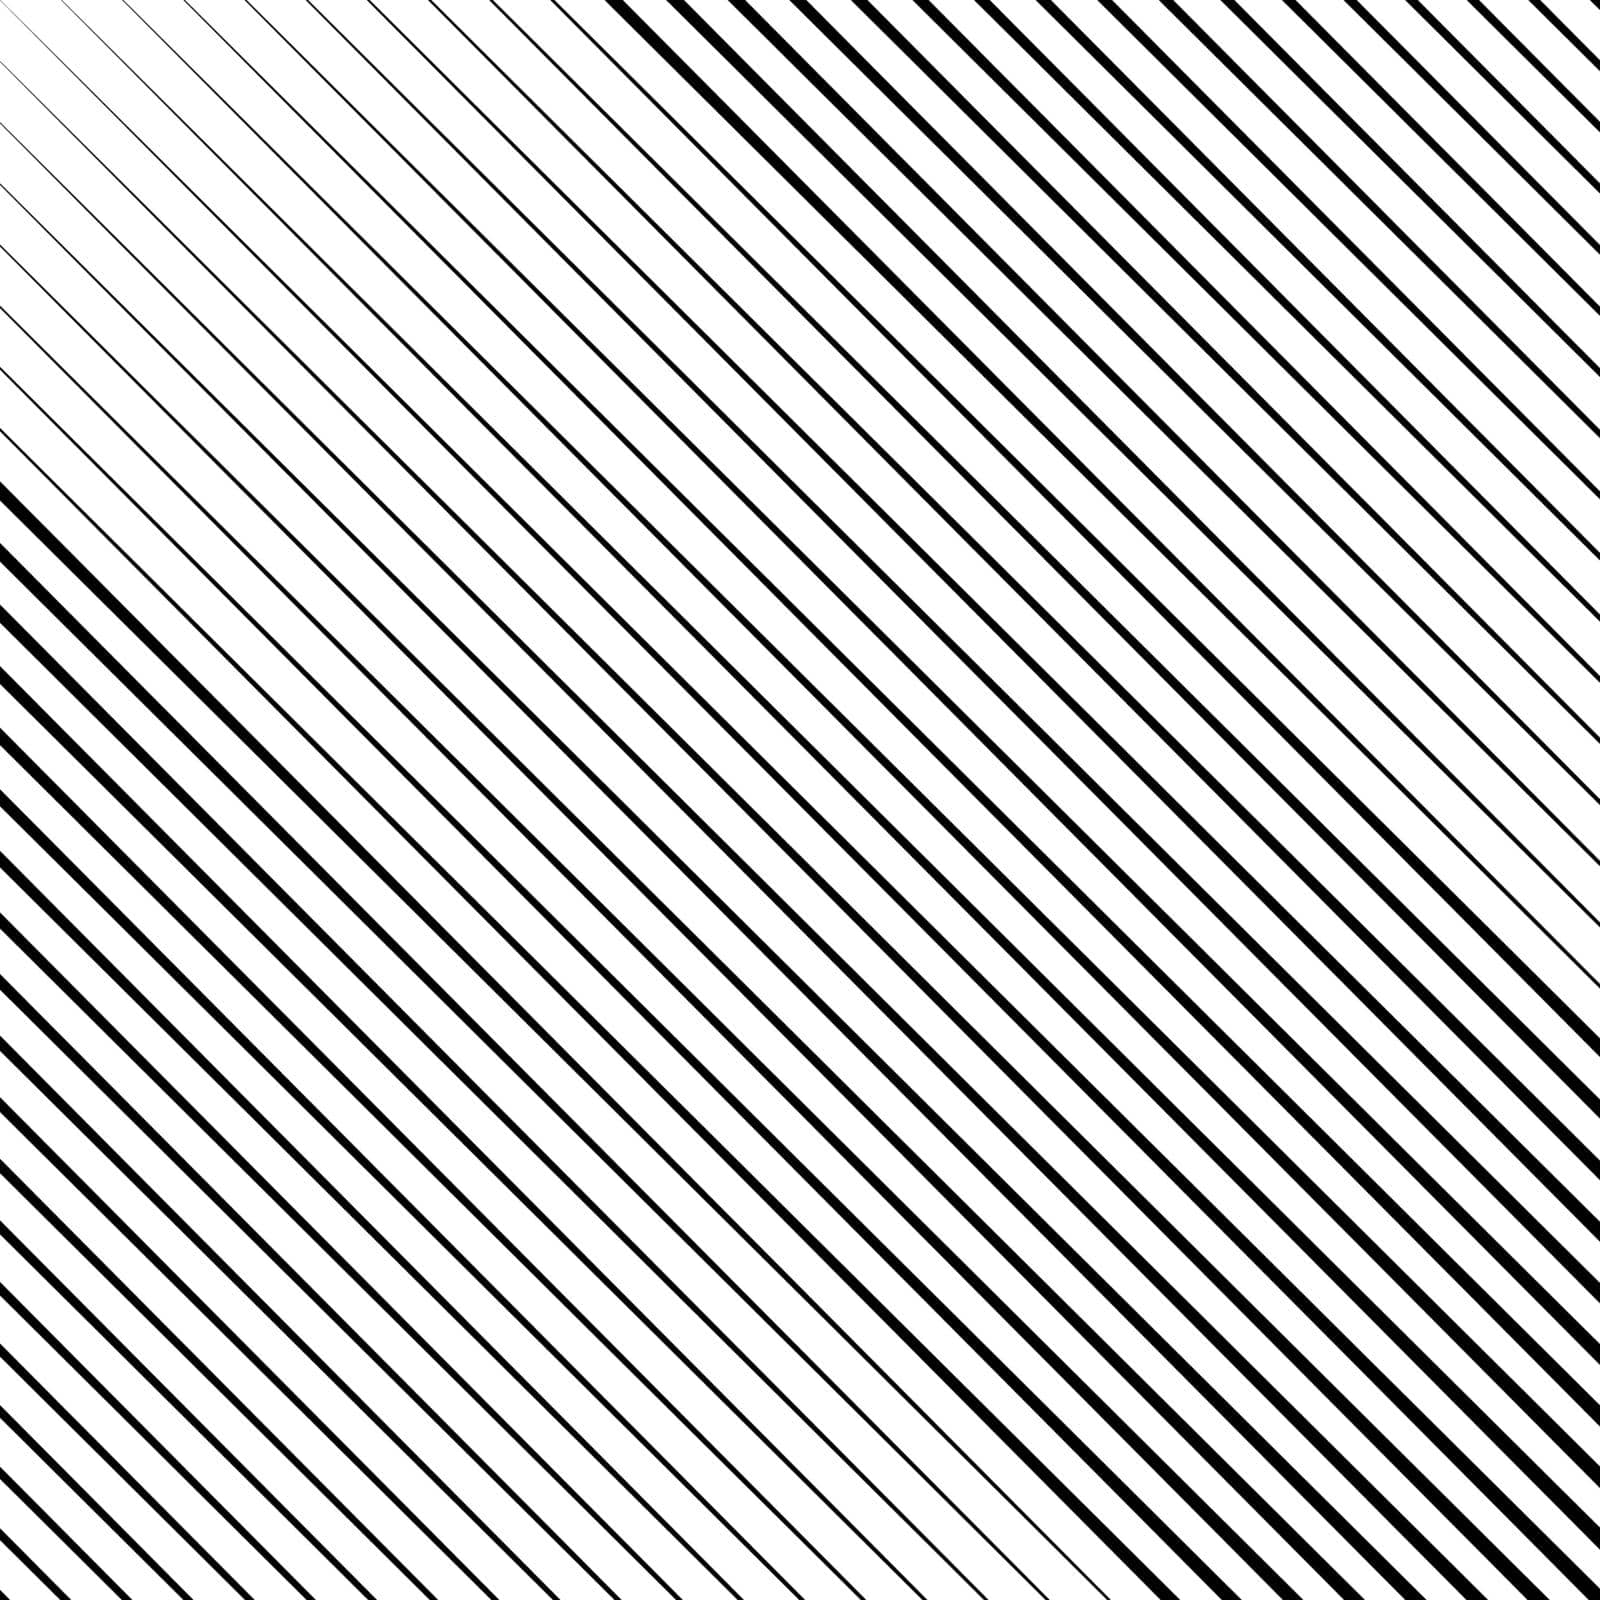 Oblique edgy line pattern background by misteremil